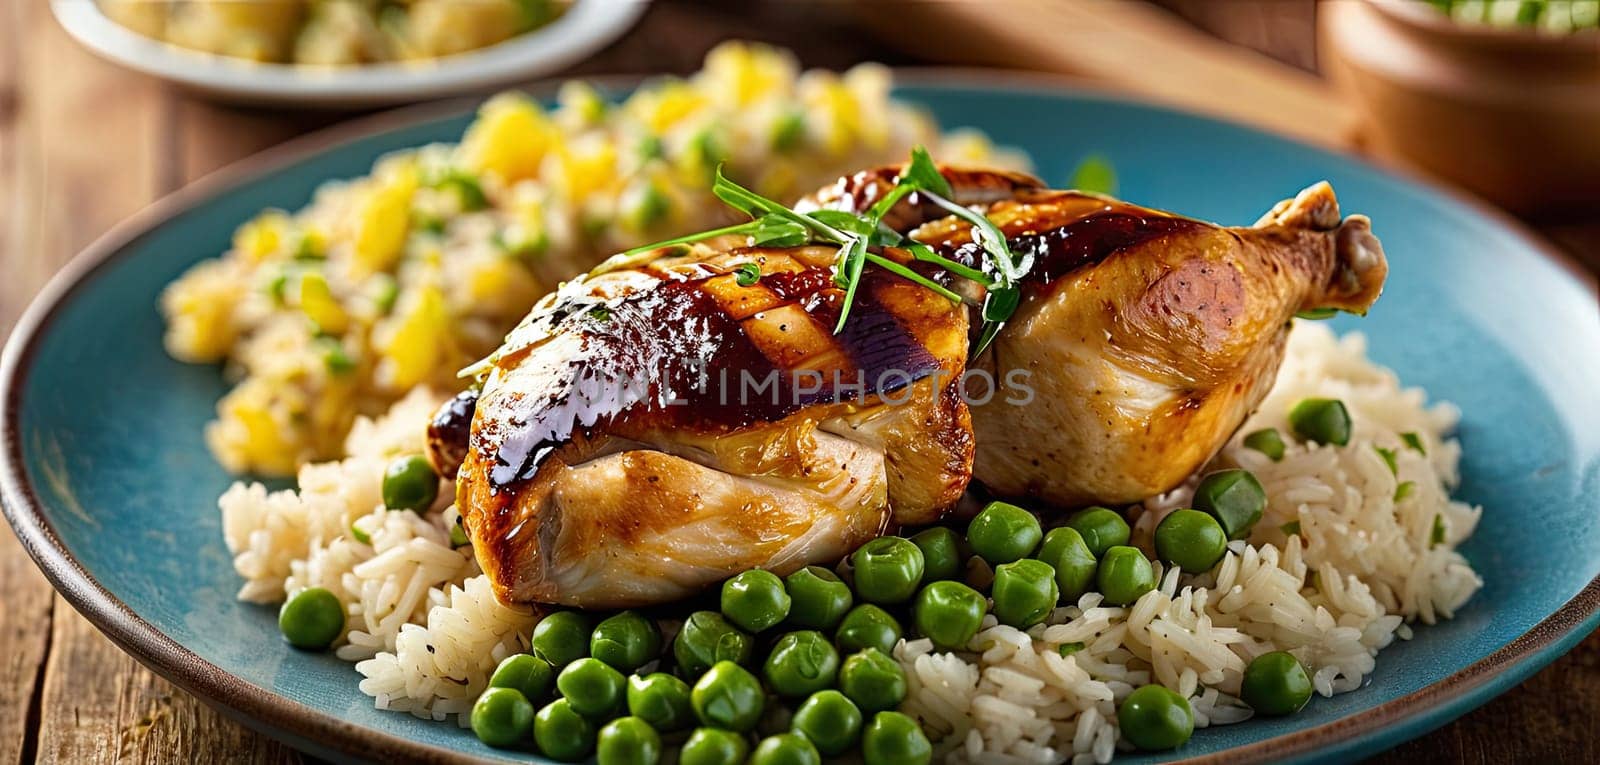 Grilled chicken, with rice and green peas served on plate, wooden rustic table background. Close-up view, grilled chicken thigh with grill marks, surrounded by rice and green peas . by panophotograph